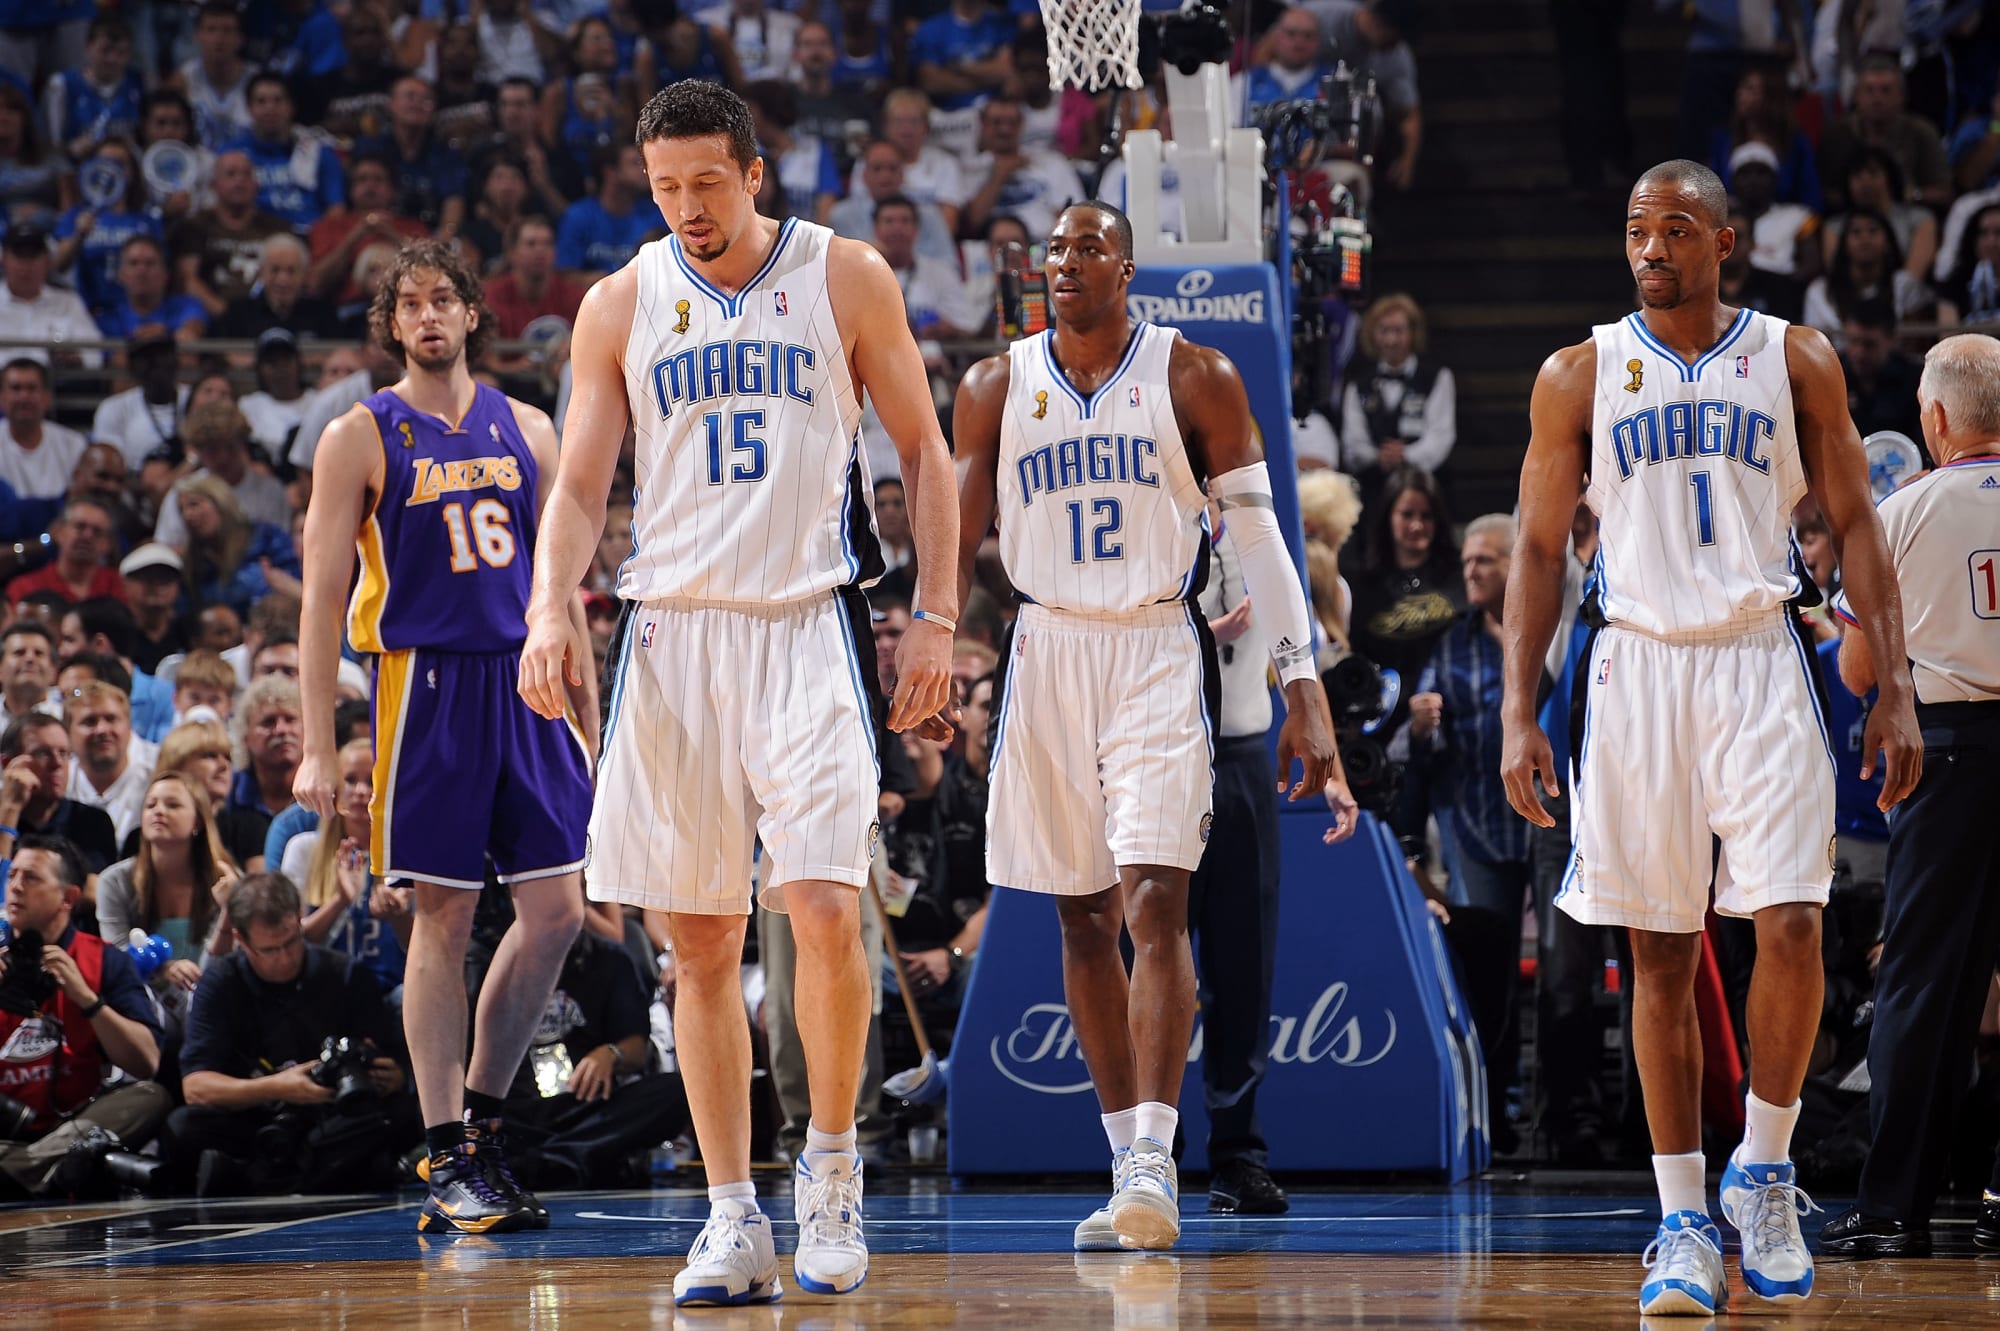 The 2009 Orlando Magic were really close to winning it all, but still